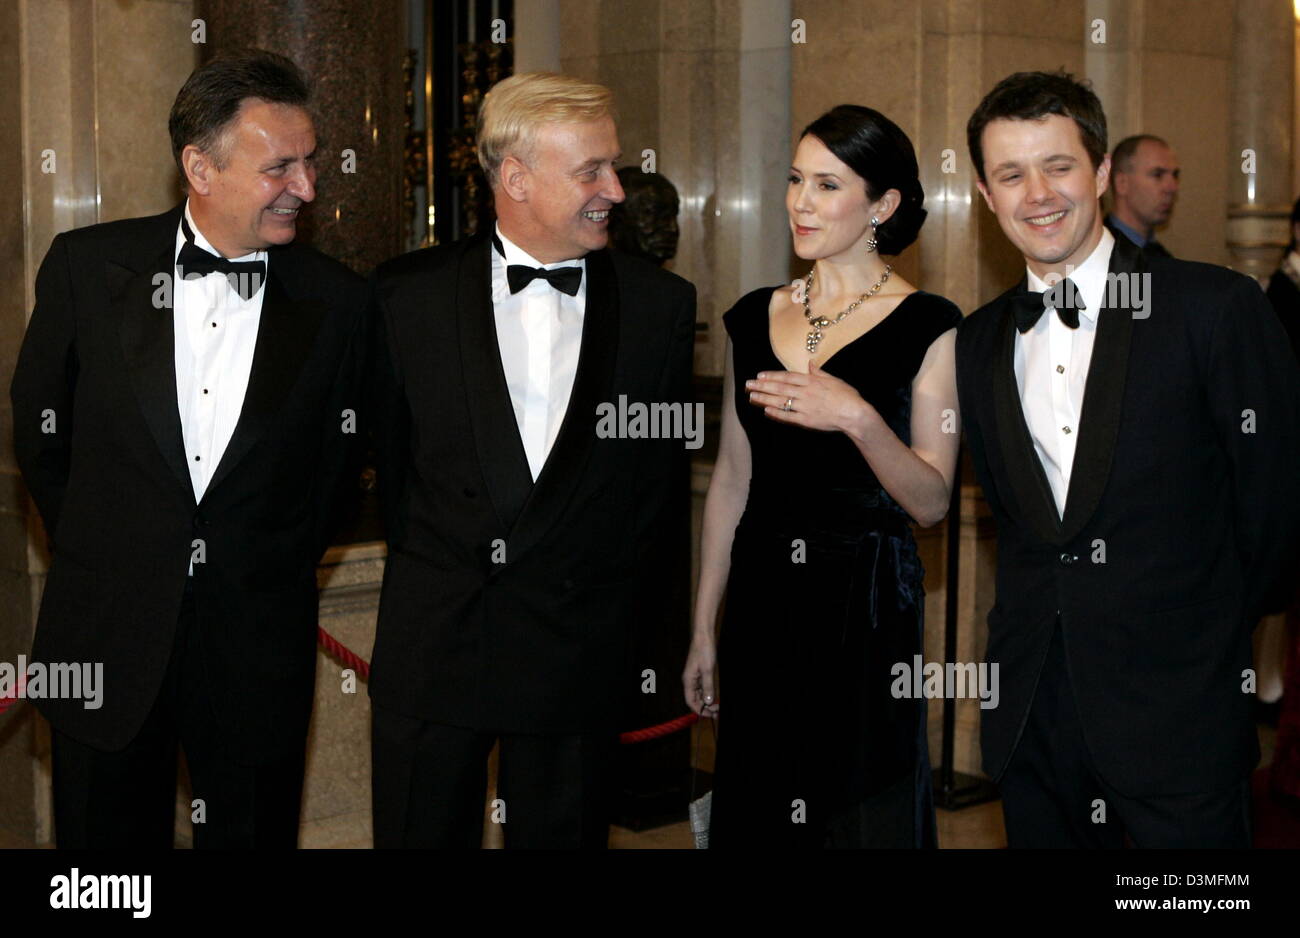 Denmark's Crown Prince Frederik (R) and his wife Crown Princess Mary (2nd R) stand next to Hamburg's mayor Ole von Beust and Michael Frenzel (L), chairman of tourism company TUI,  ahead of the traditional Matthiae meal at the town hall in Hamburg, Germany, Friday, 17 February 2006. The Danish Crown Prince and Crown Princess were invited as guest of honour to the traditional meal ho Stock Photo